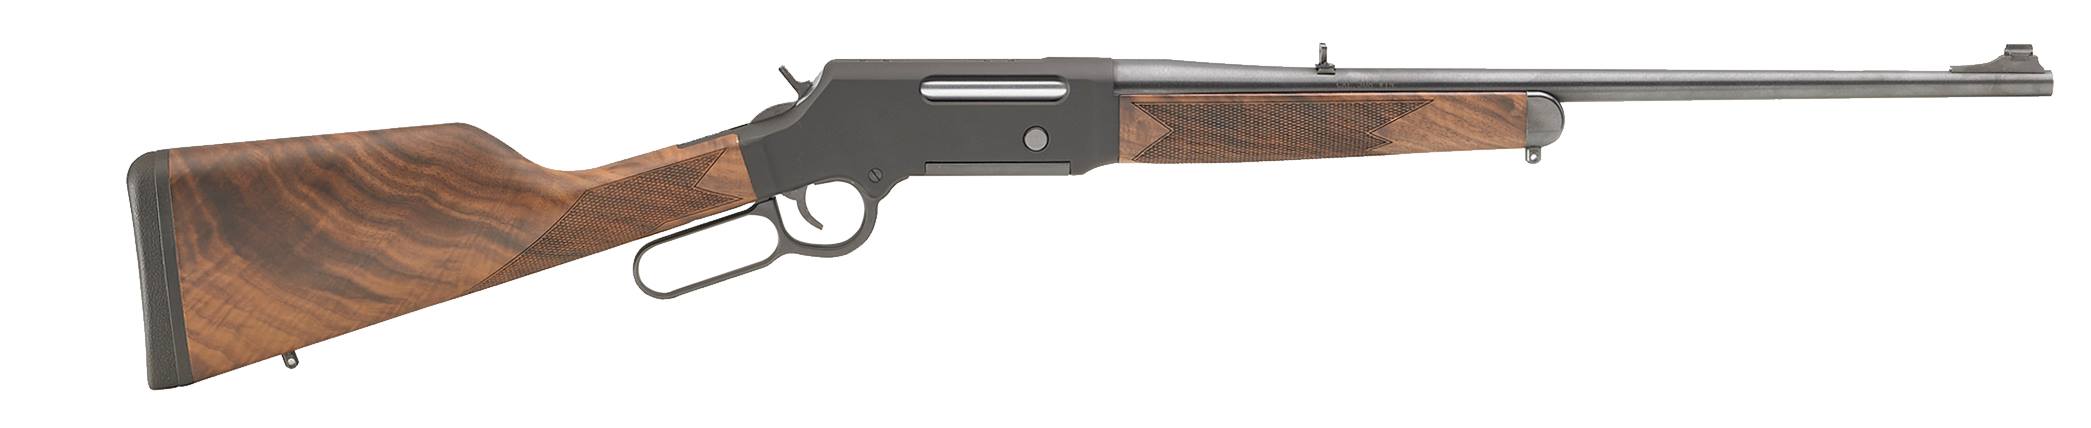 Henry Repeating Arms Long Ranger 223 Rem | 5.56 NATO